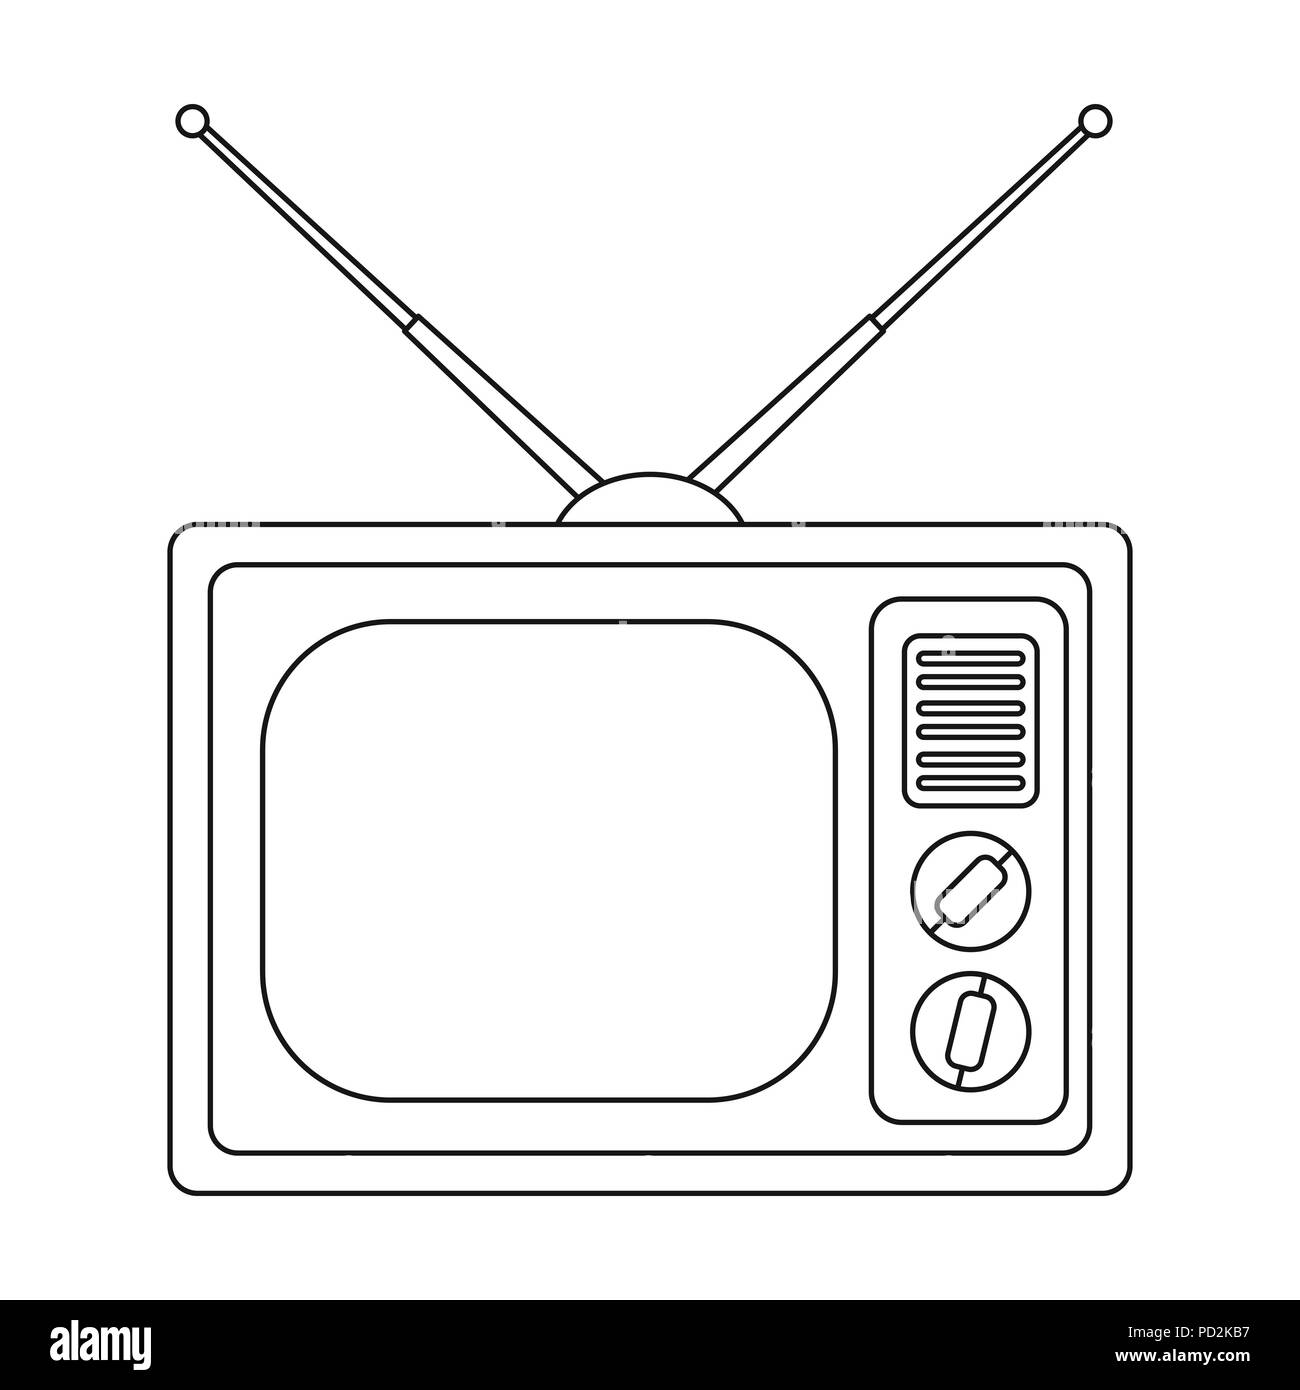 antenna ,broadcast,broadcasting,design,display,electronic,entertainment,home,icon,illustration,image,isolated,logo,media,movie,news,object,old,outline,receiver,retro,screen,sign,style, symbol,technology,television,tube,tv,vector,video,view,vintage,visual ...